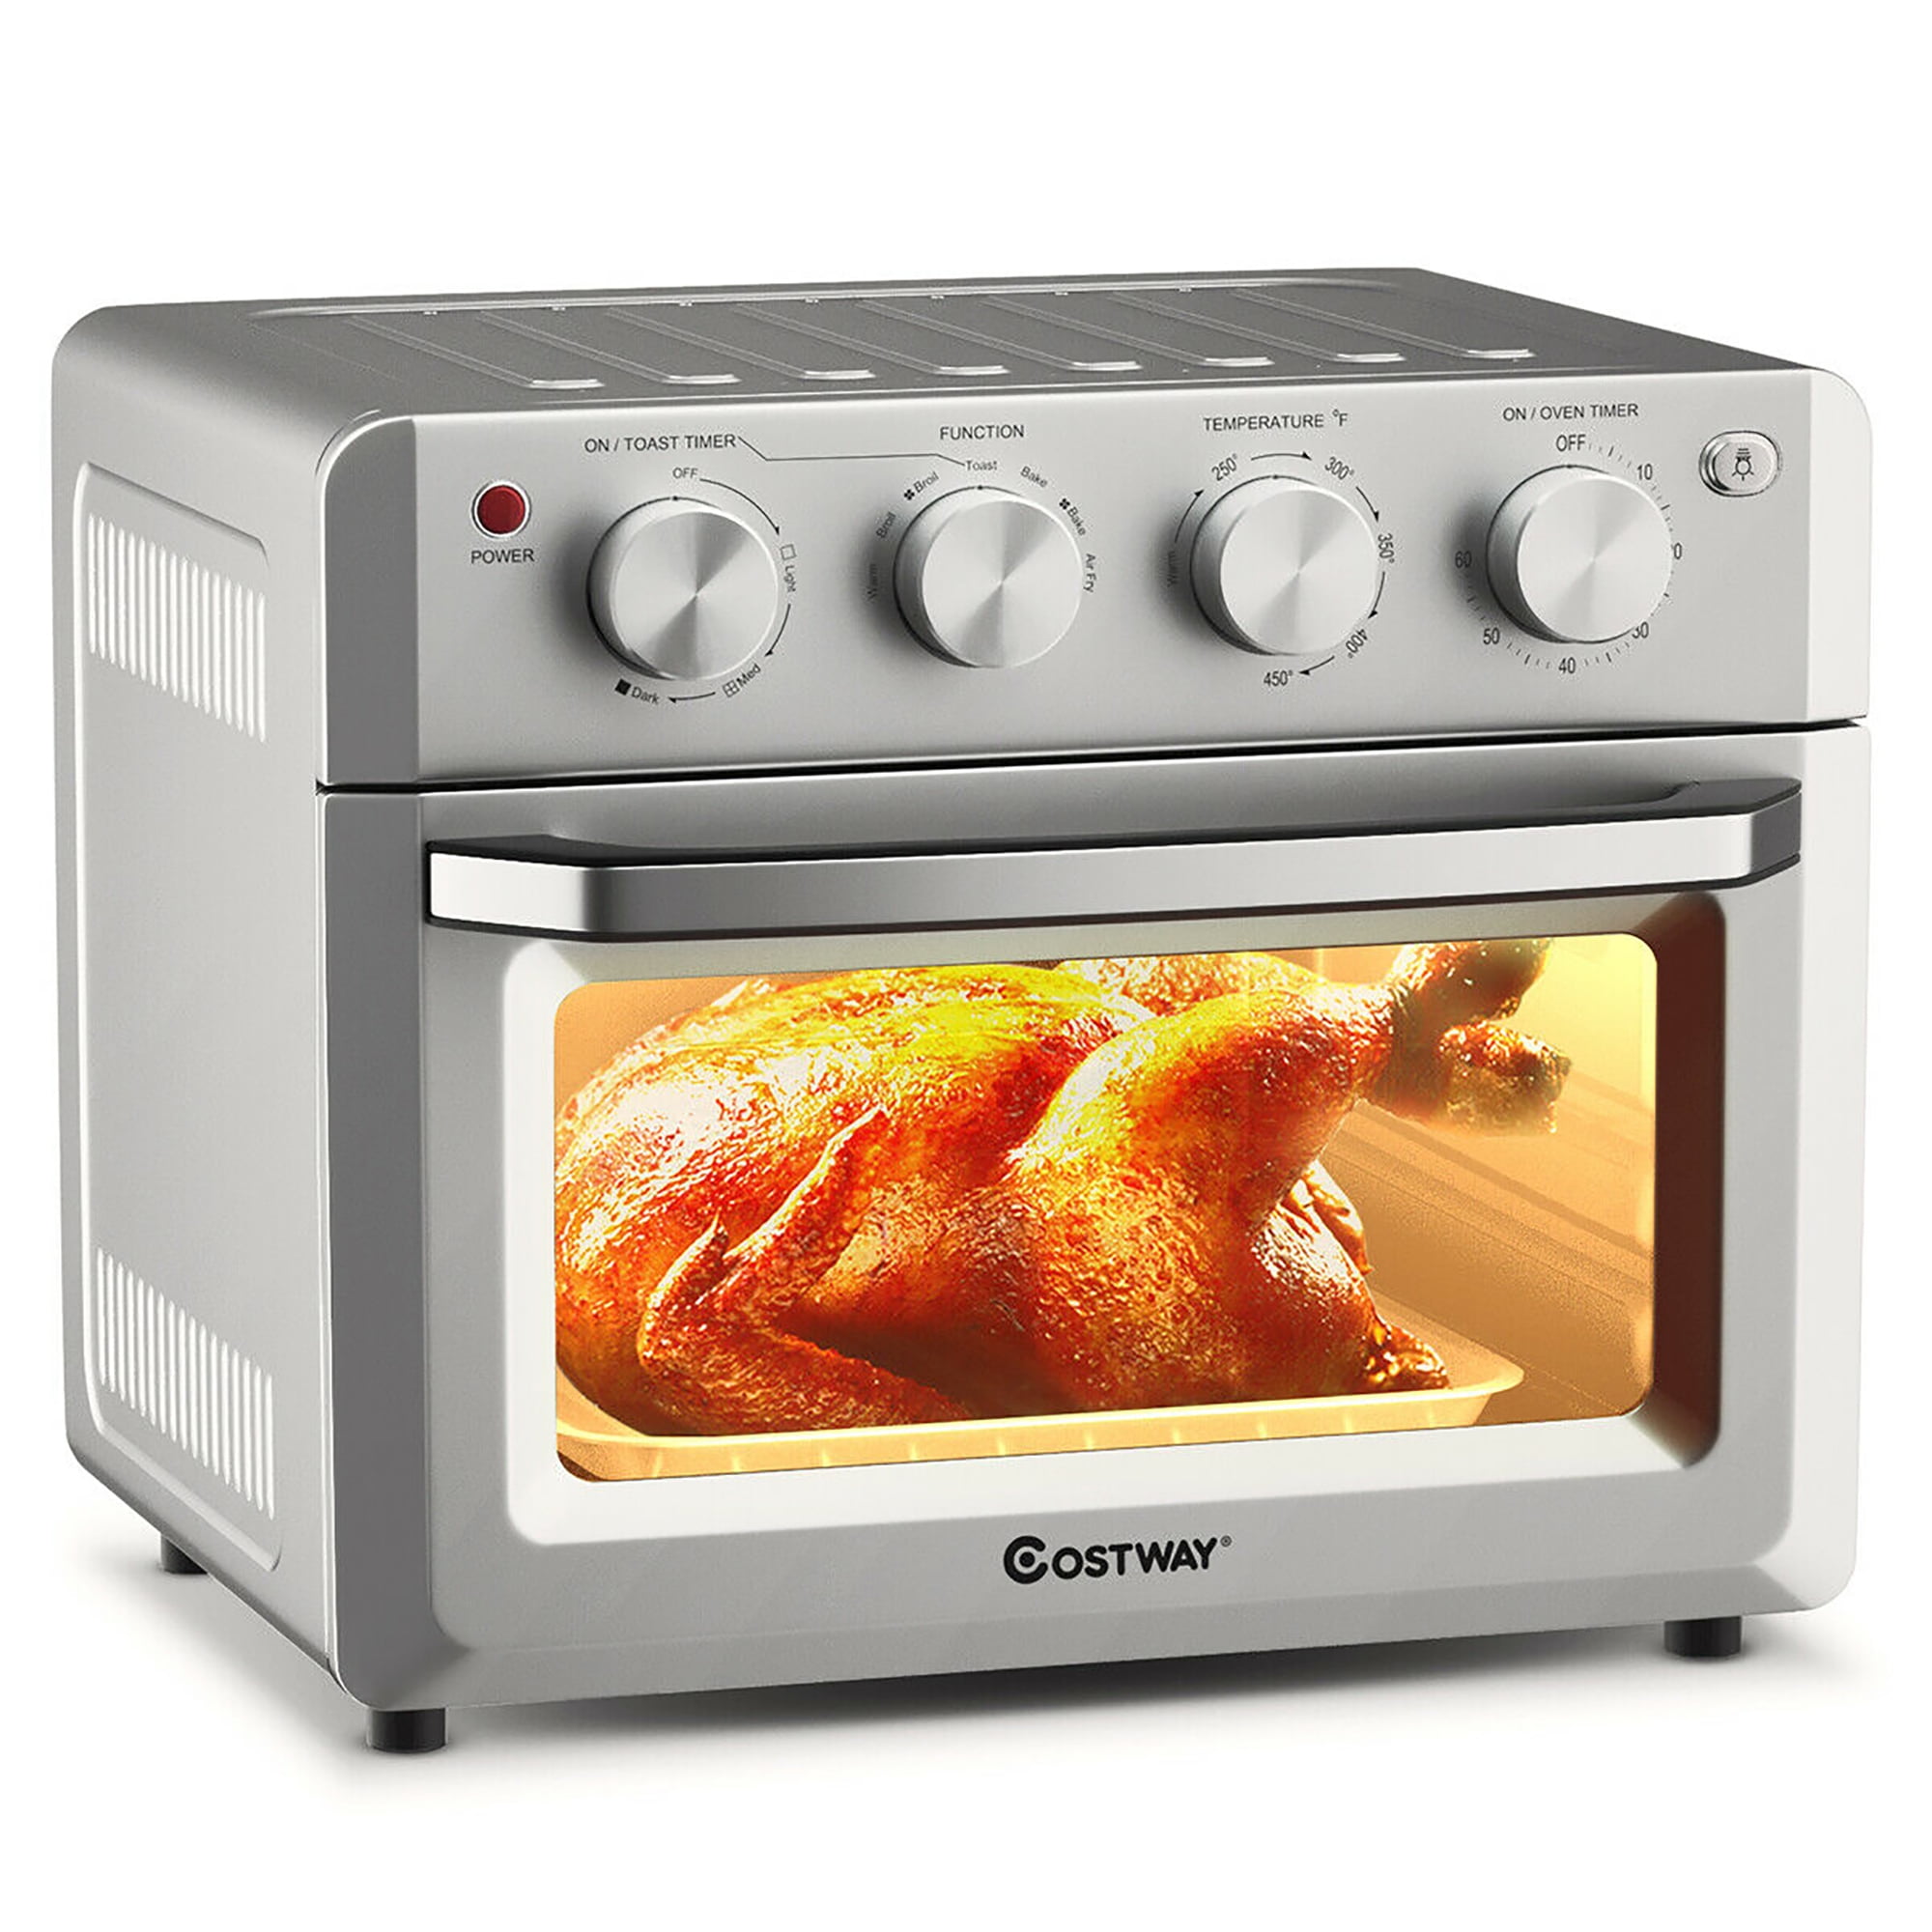 EP24760GR Costway 16-in-1 Air Fryer Oven 15.5 QT Toaster Oven Rotisserie  Dehydrator w/ Accessories Black